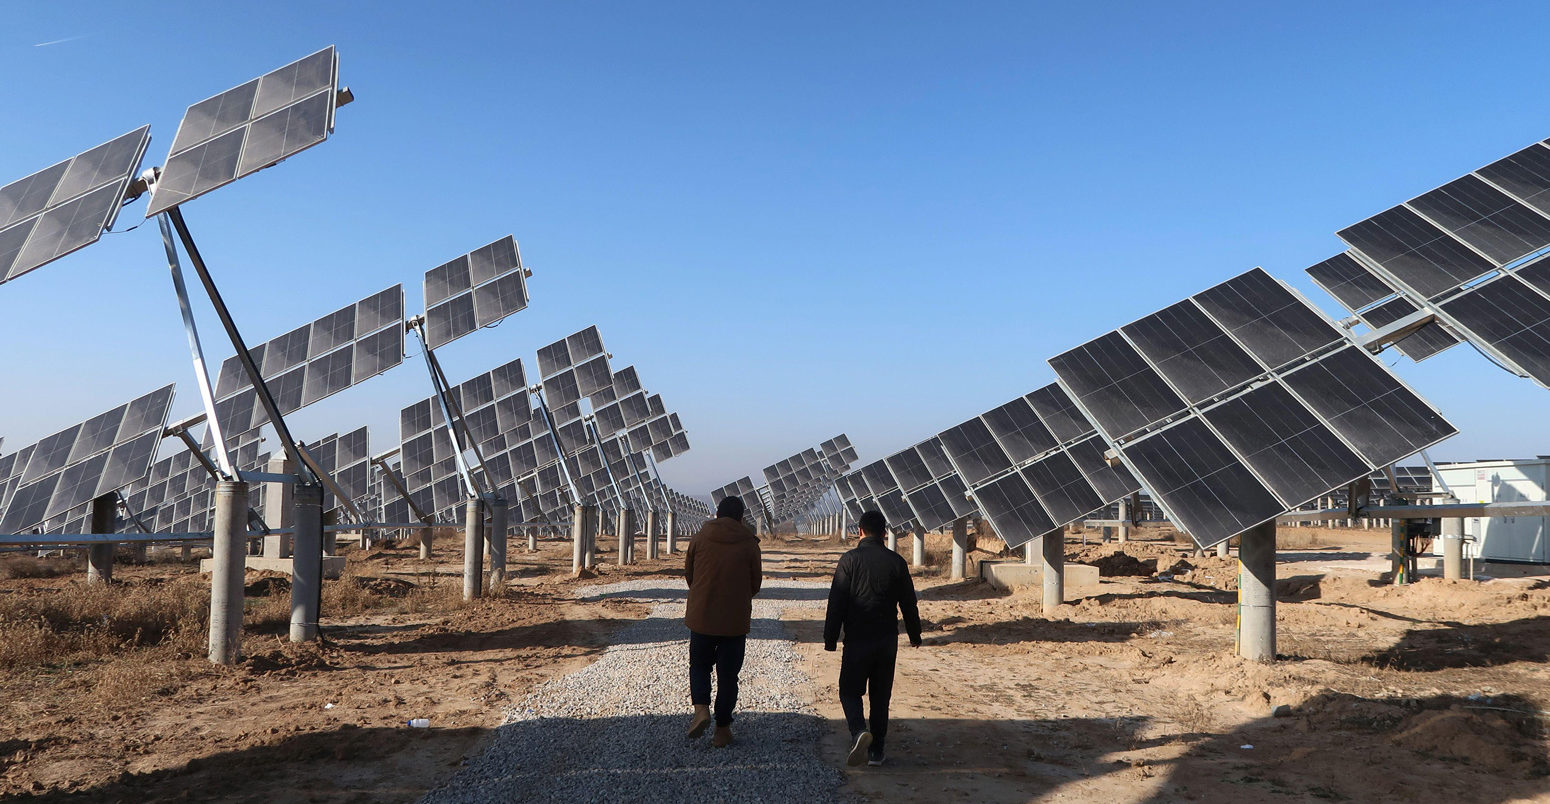 Workers walk at a solar power station in Tongchuan, Shaanxi province, China December 11, 2019. Picture taken December 11, 2019. Credit: REUTERS/Sean Yong